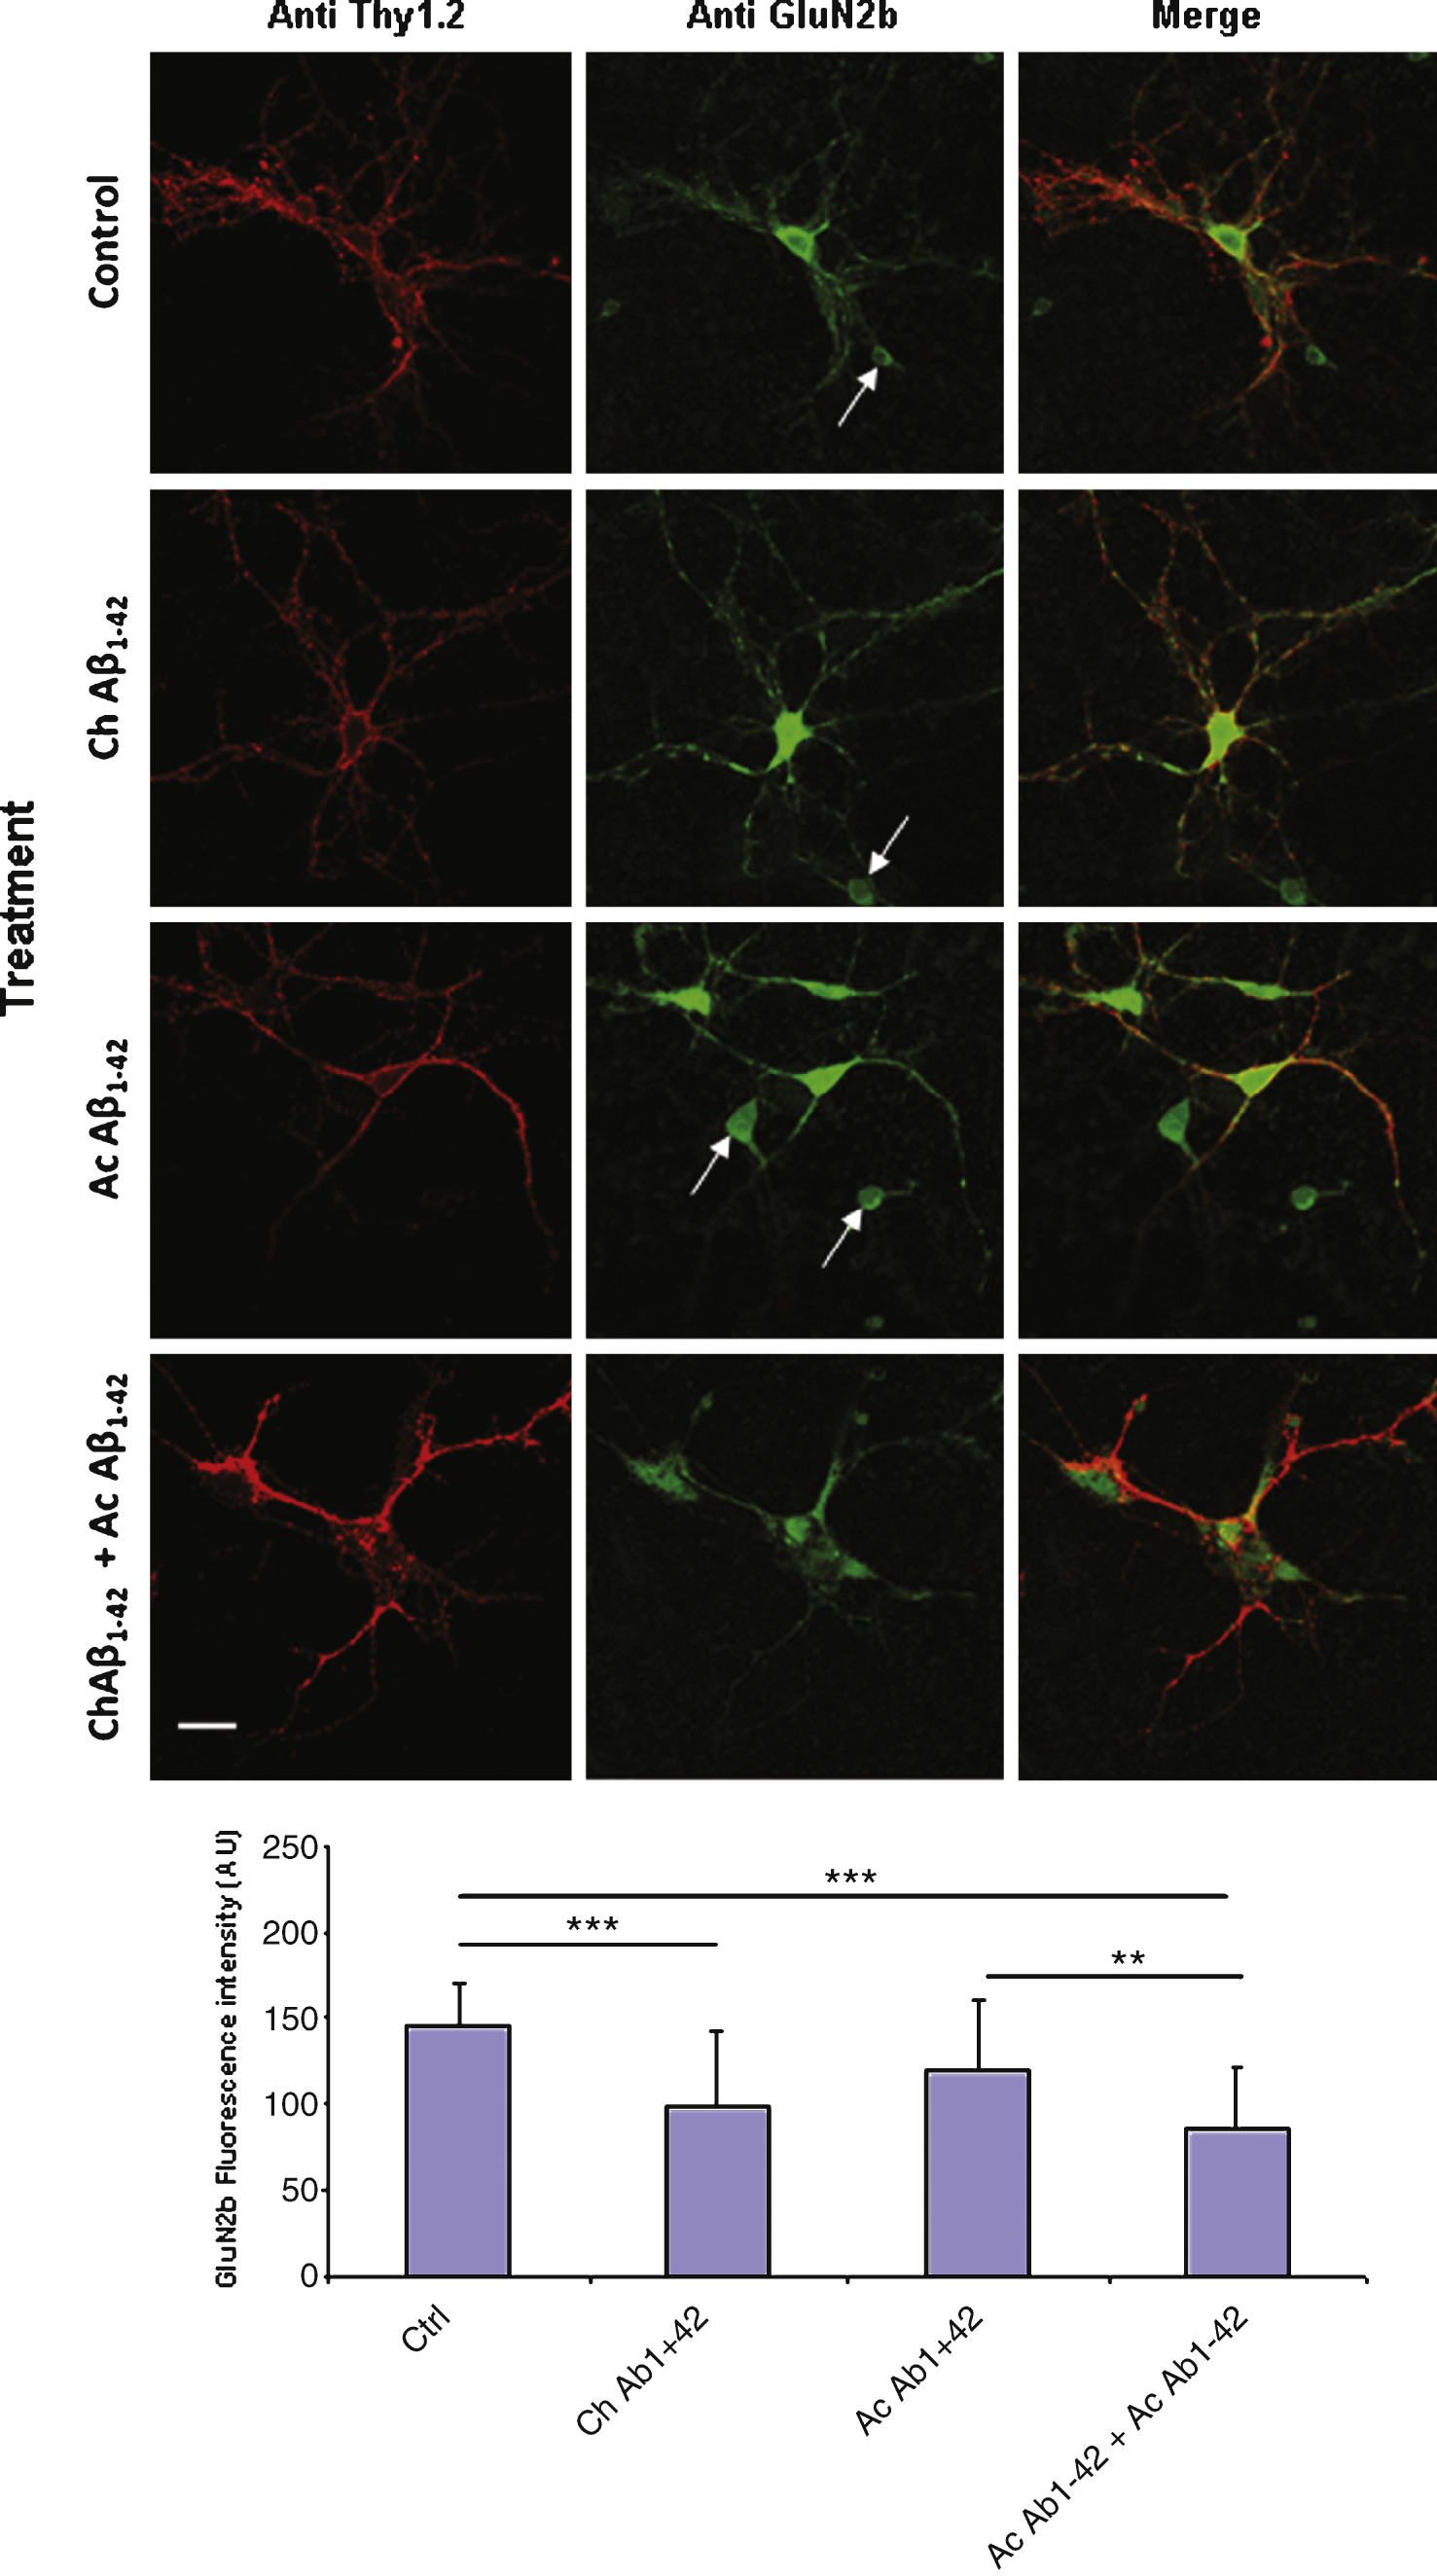 Chronic incubation of cortical mouse neurons with 10 nM monomeric Aβ1–42 induces a significant decrease of GluN2B expression on the plasma membrane of the cells. Fixed non permeabilized cells were revealed by an anti-GluN2B primary antibody (green) and an anti-Thy1.2 antibody (red) to characterize neurons. The immunofluorescence of GluN2B was quantified in Thy1.2-positive cells only (lower graph). (Crl: vehicle application as control; Ac: acute 1 μM Aβ oligomers incubation; Ch: chronic 10 nM Aβ monomers incubation; Statistics: one way ANOVA and subsequent Bonferroni test;  **p <  0.01;  ***p <  0.001). Calibration bar 20 μm.